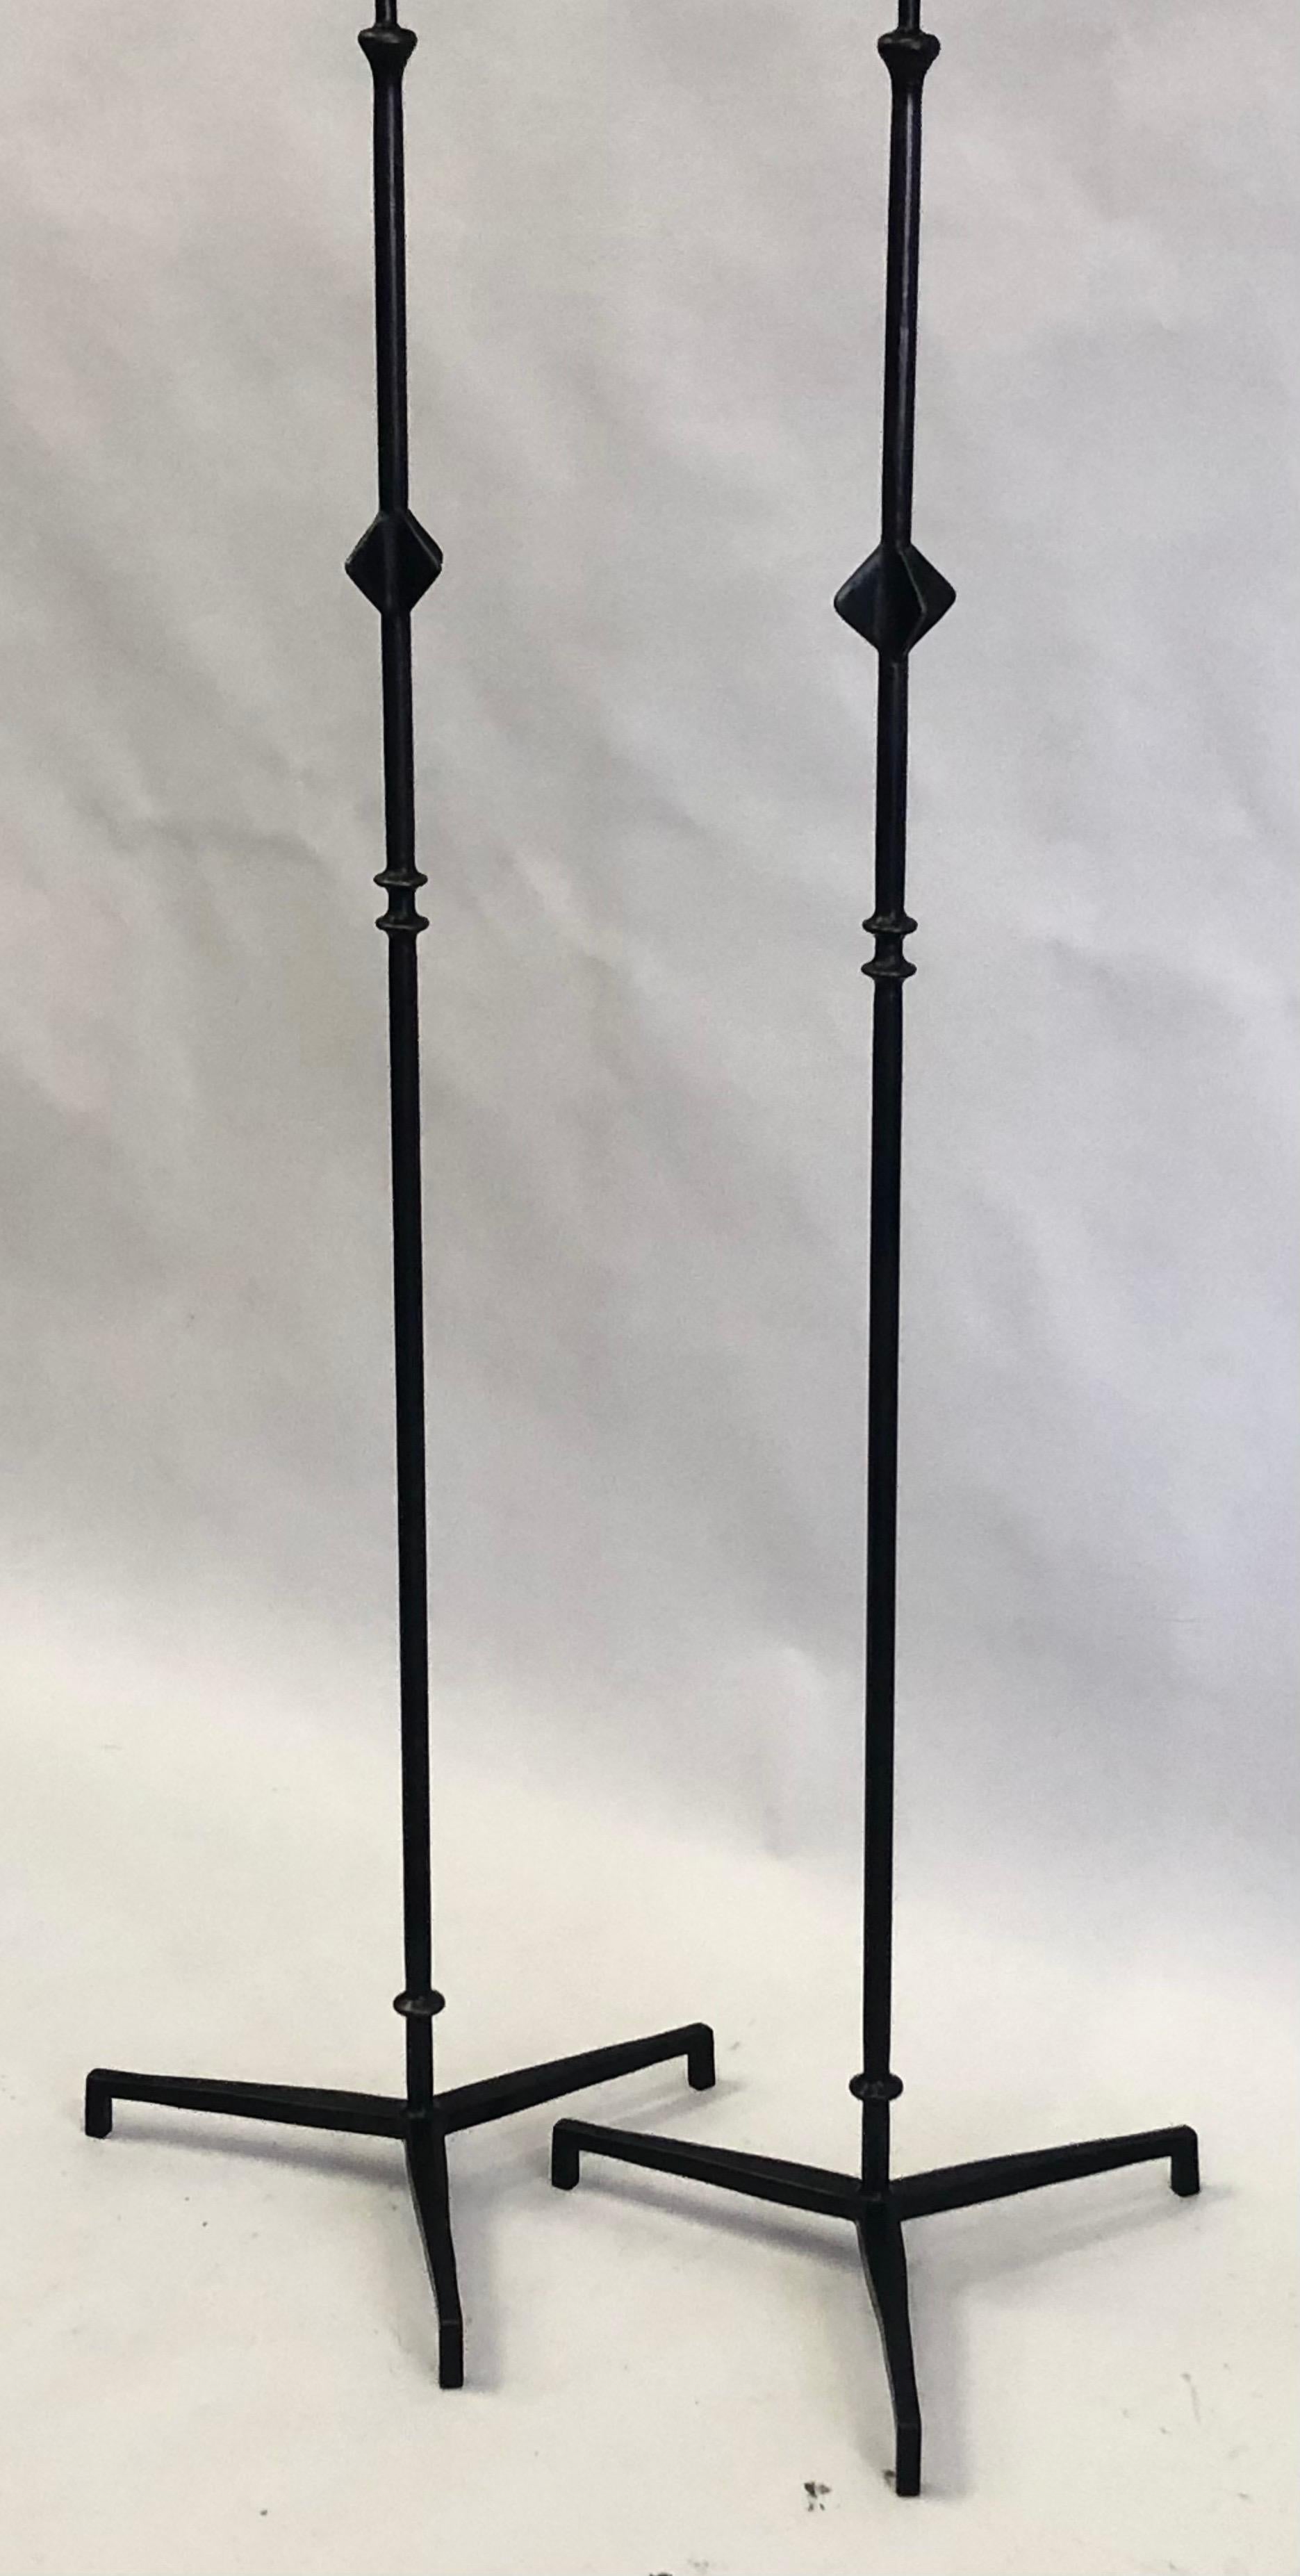 A timeless pair of French forged iron floor lamps with dark patina decorated with the form of a star, after Alberto & Diego Giacometti for Jean-Michel Frank. Model: Etoile. Dimensions: H: 72 x D 19.5 ; Shades are for demonstration only.

The